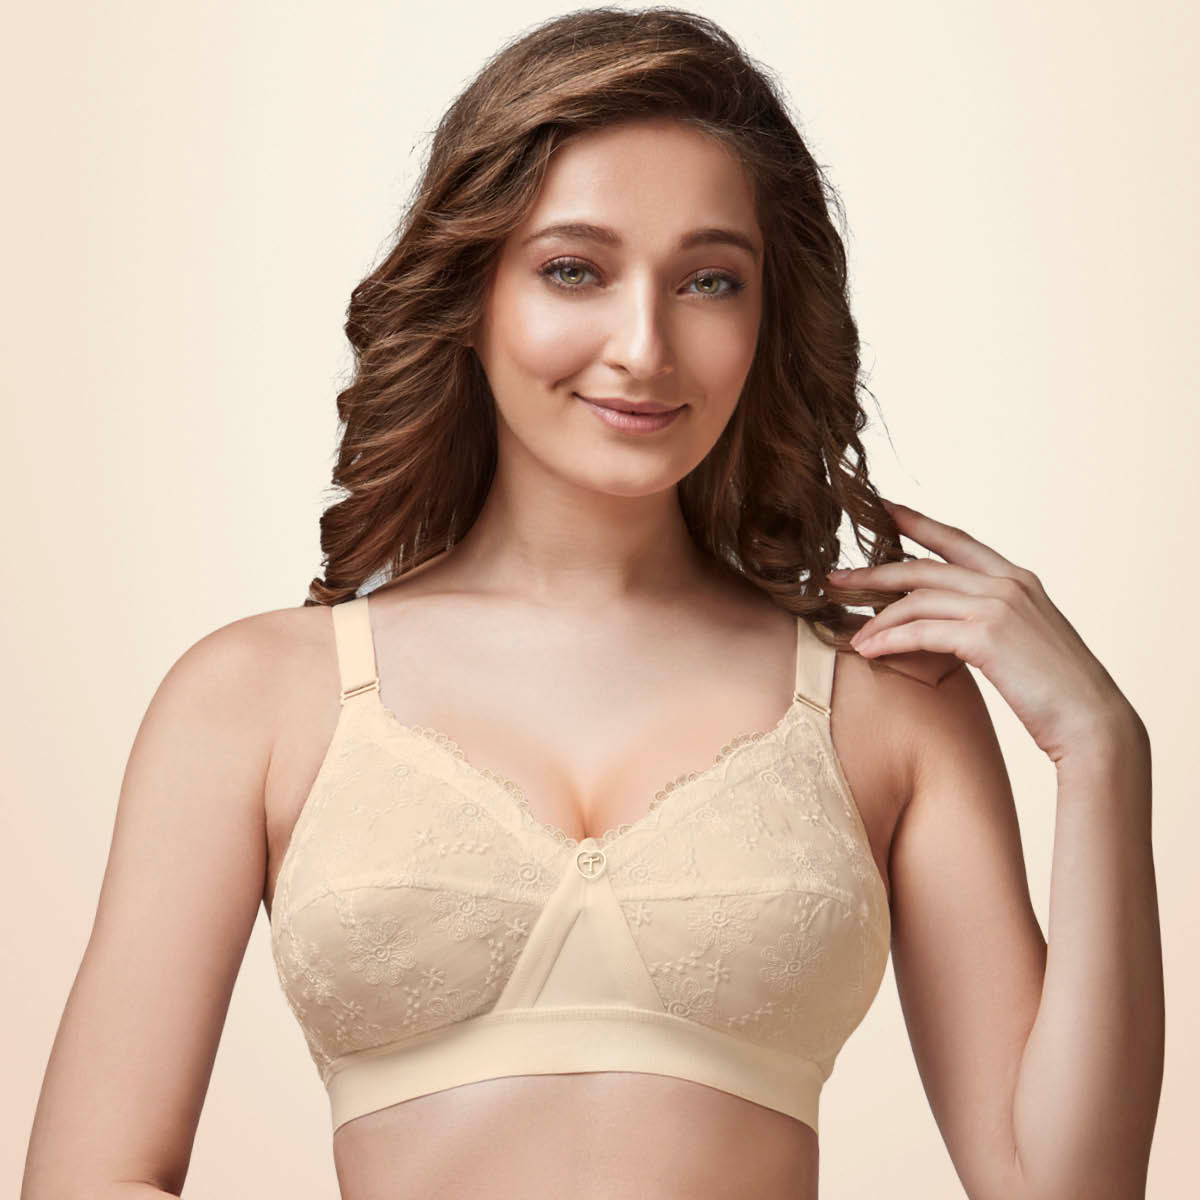 Trylo Cathrina Women Cotton Non-wired Soft Full Cup Bra - Nude (40D)